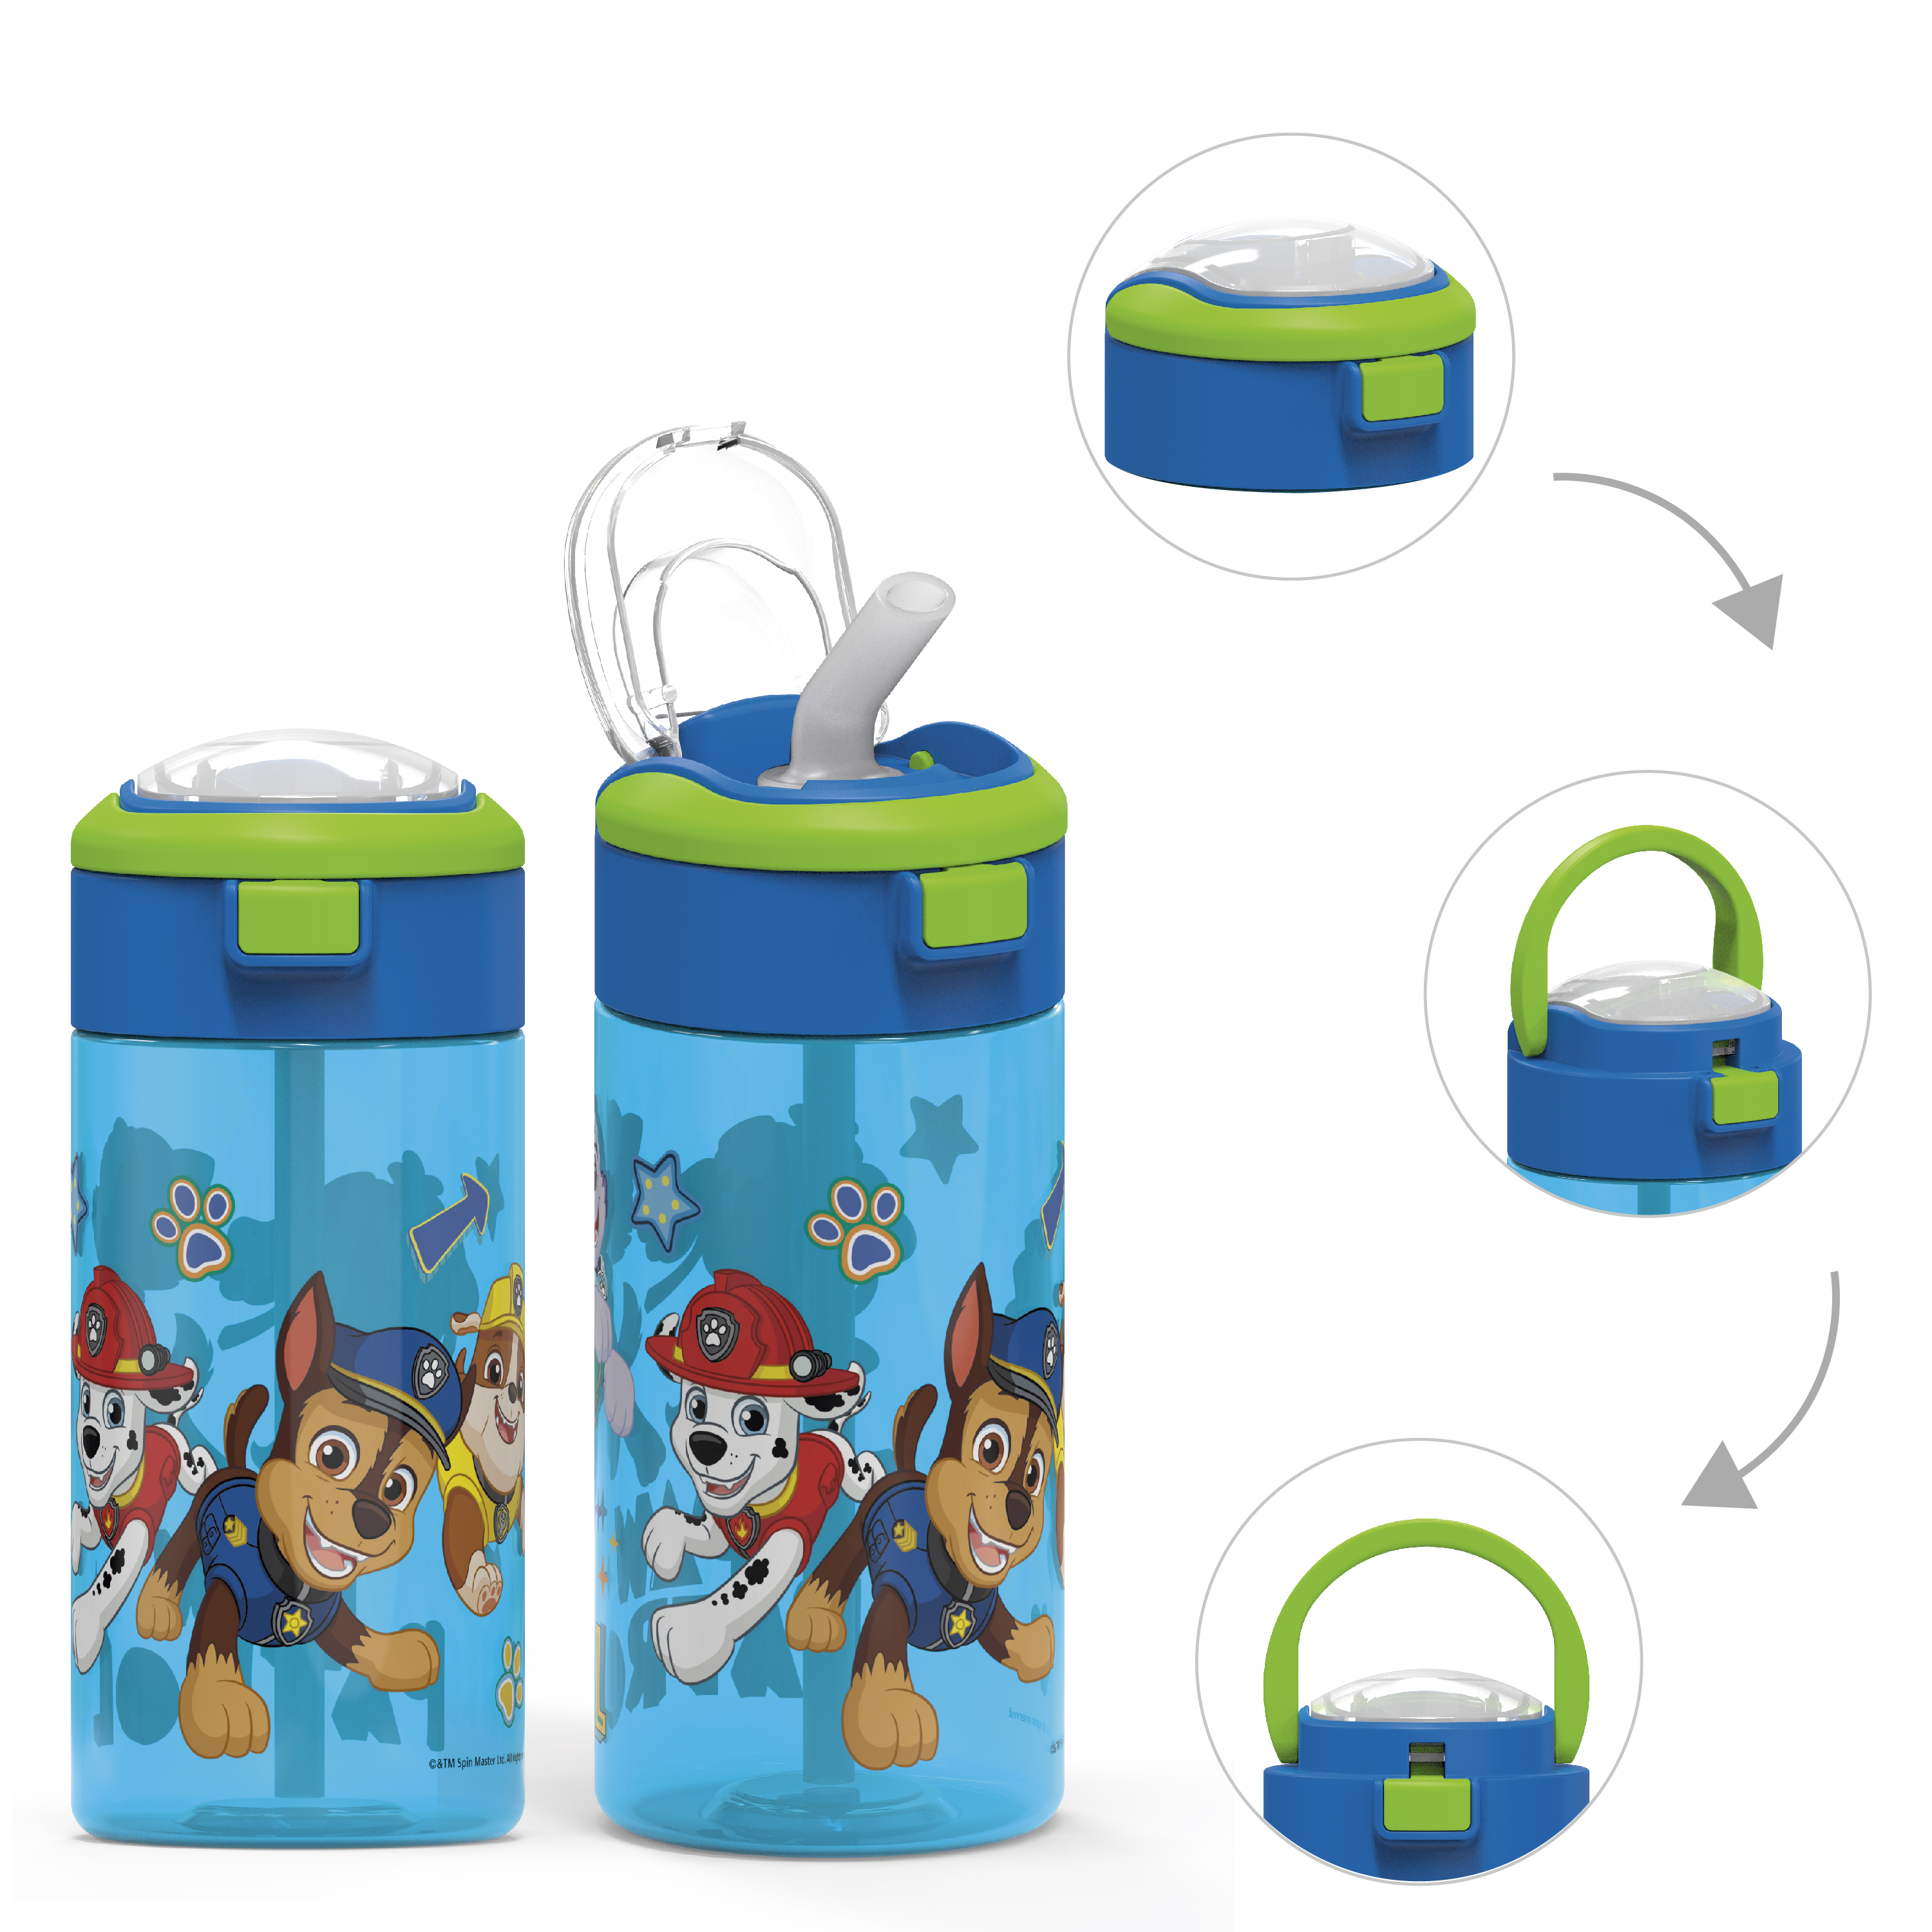 Paw Patrol 18 ounce Reusable Plastic Water Bottle with Push-button lid, Chase, Marshall & Rubble slideshow image 1